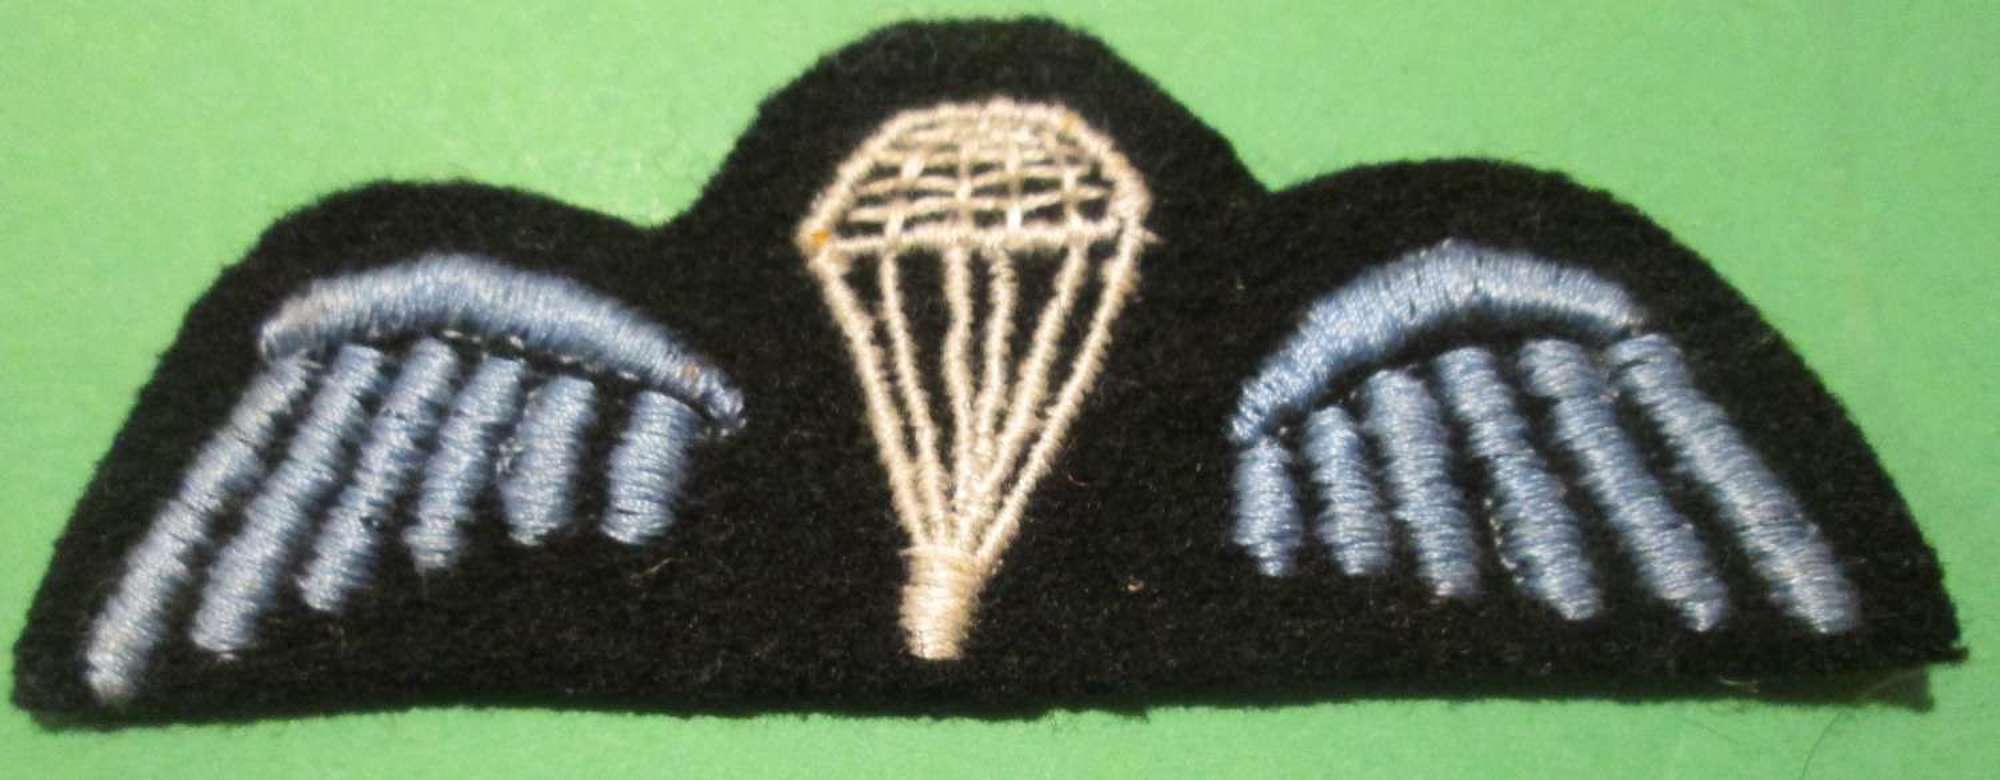 A RARE WWII SOE STYLE DARK BLUE / BLACK BACKGROUND JUMP WING